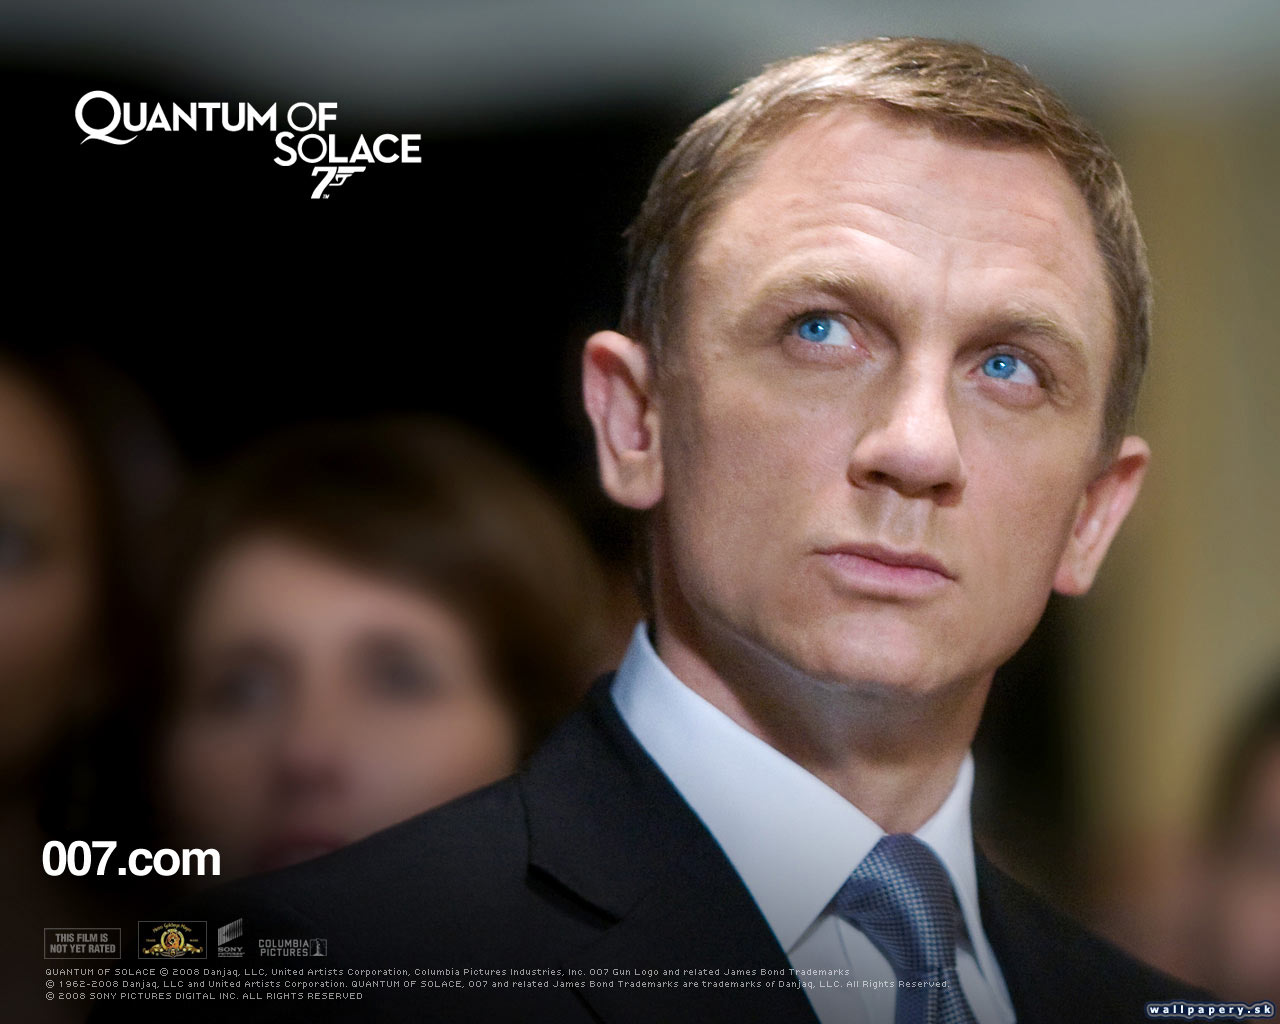 Quantum of Solace: The Game - wallpaper 4